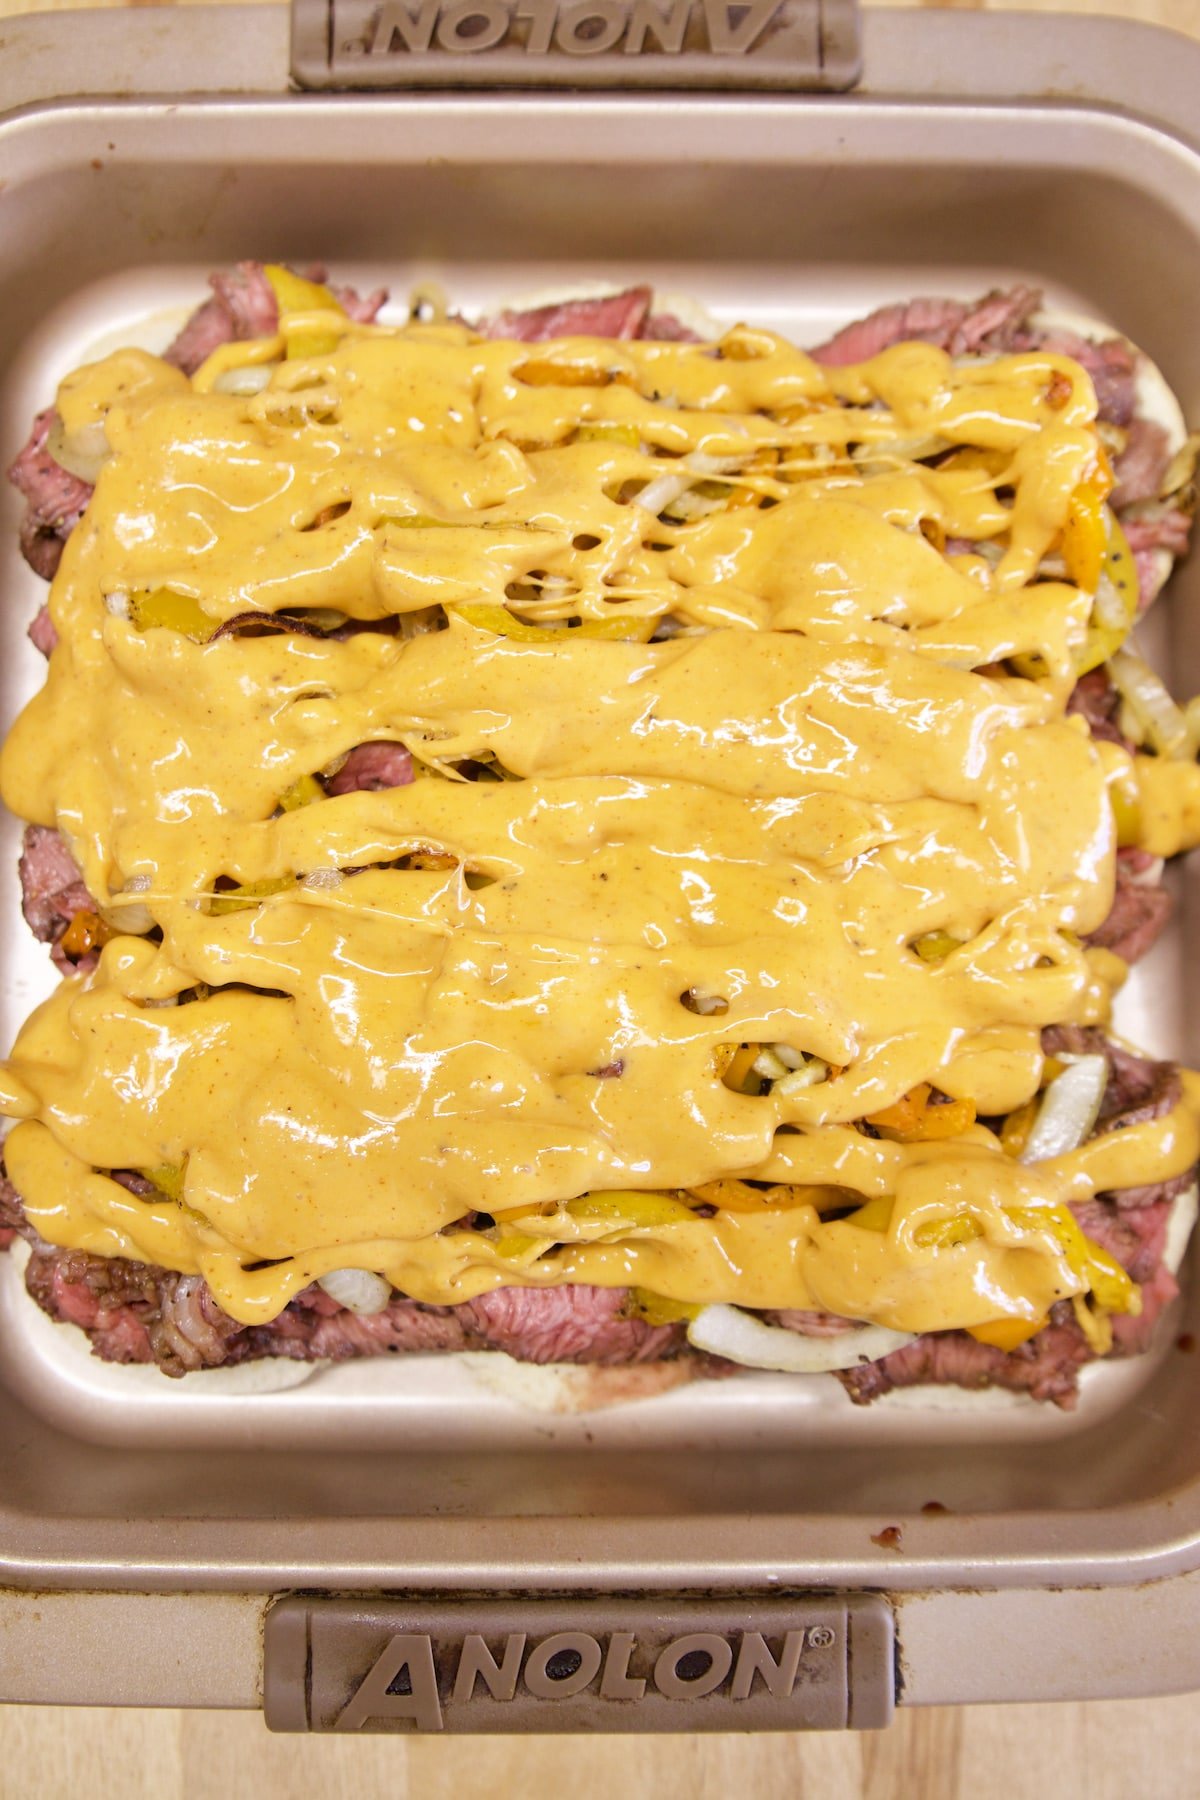 Cheese sauce drizzled over steak, peppers, onions.